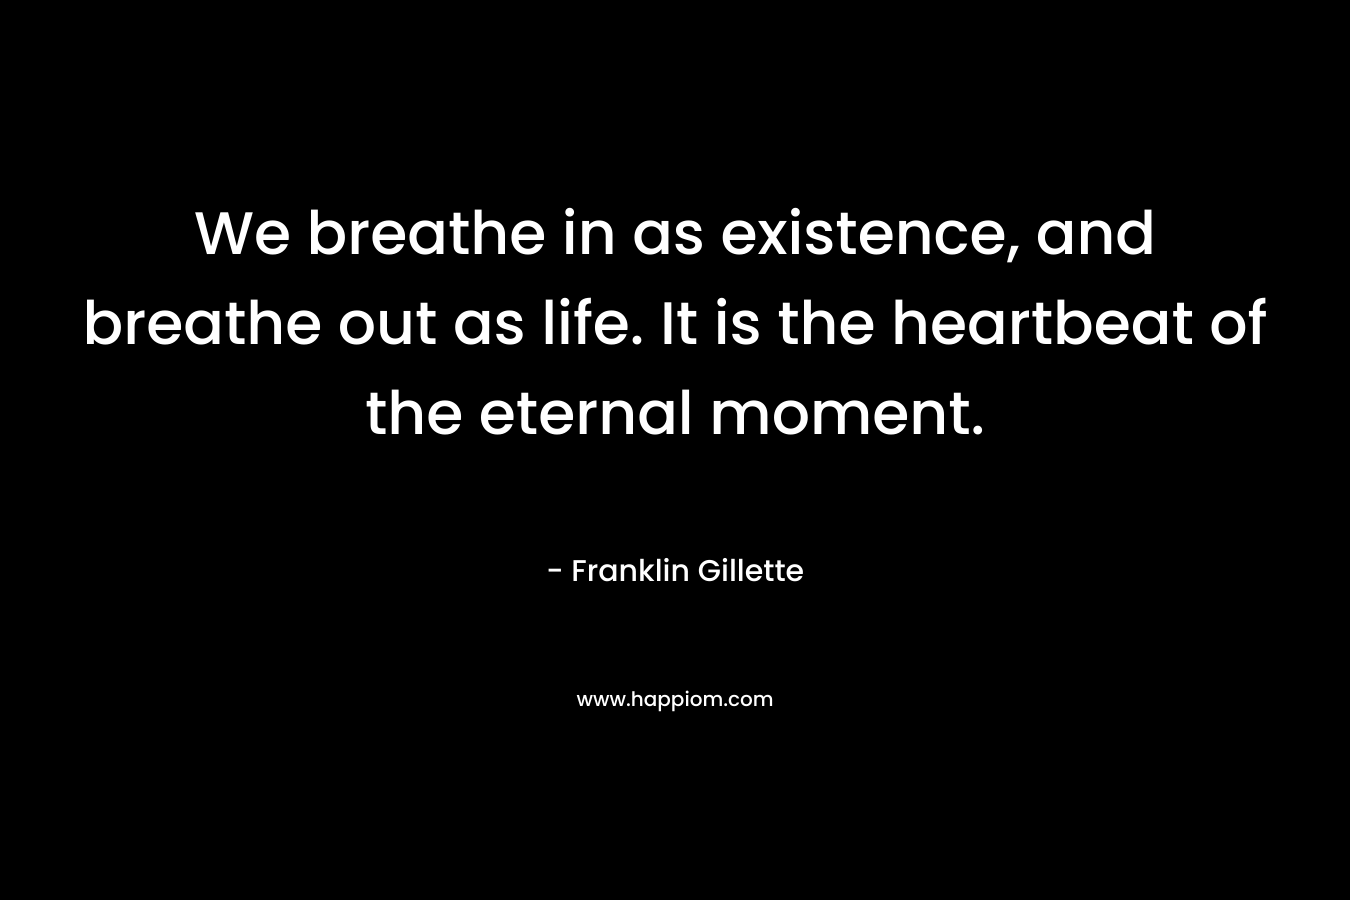 We breathe in as existence, and breathe out as life. It is the heartbeat of the eternal moment. – Franklin Gillette